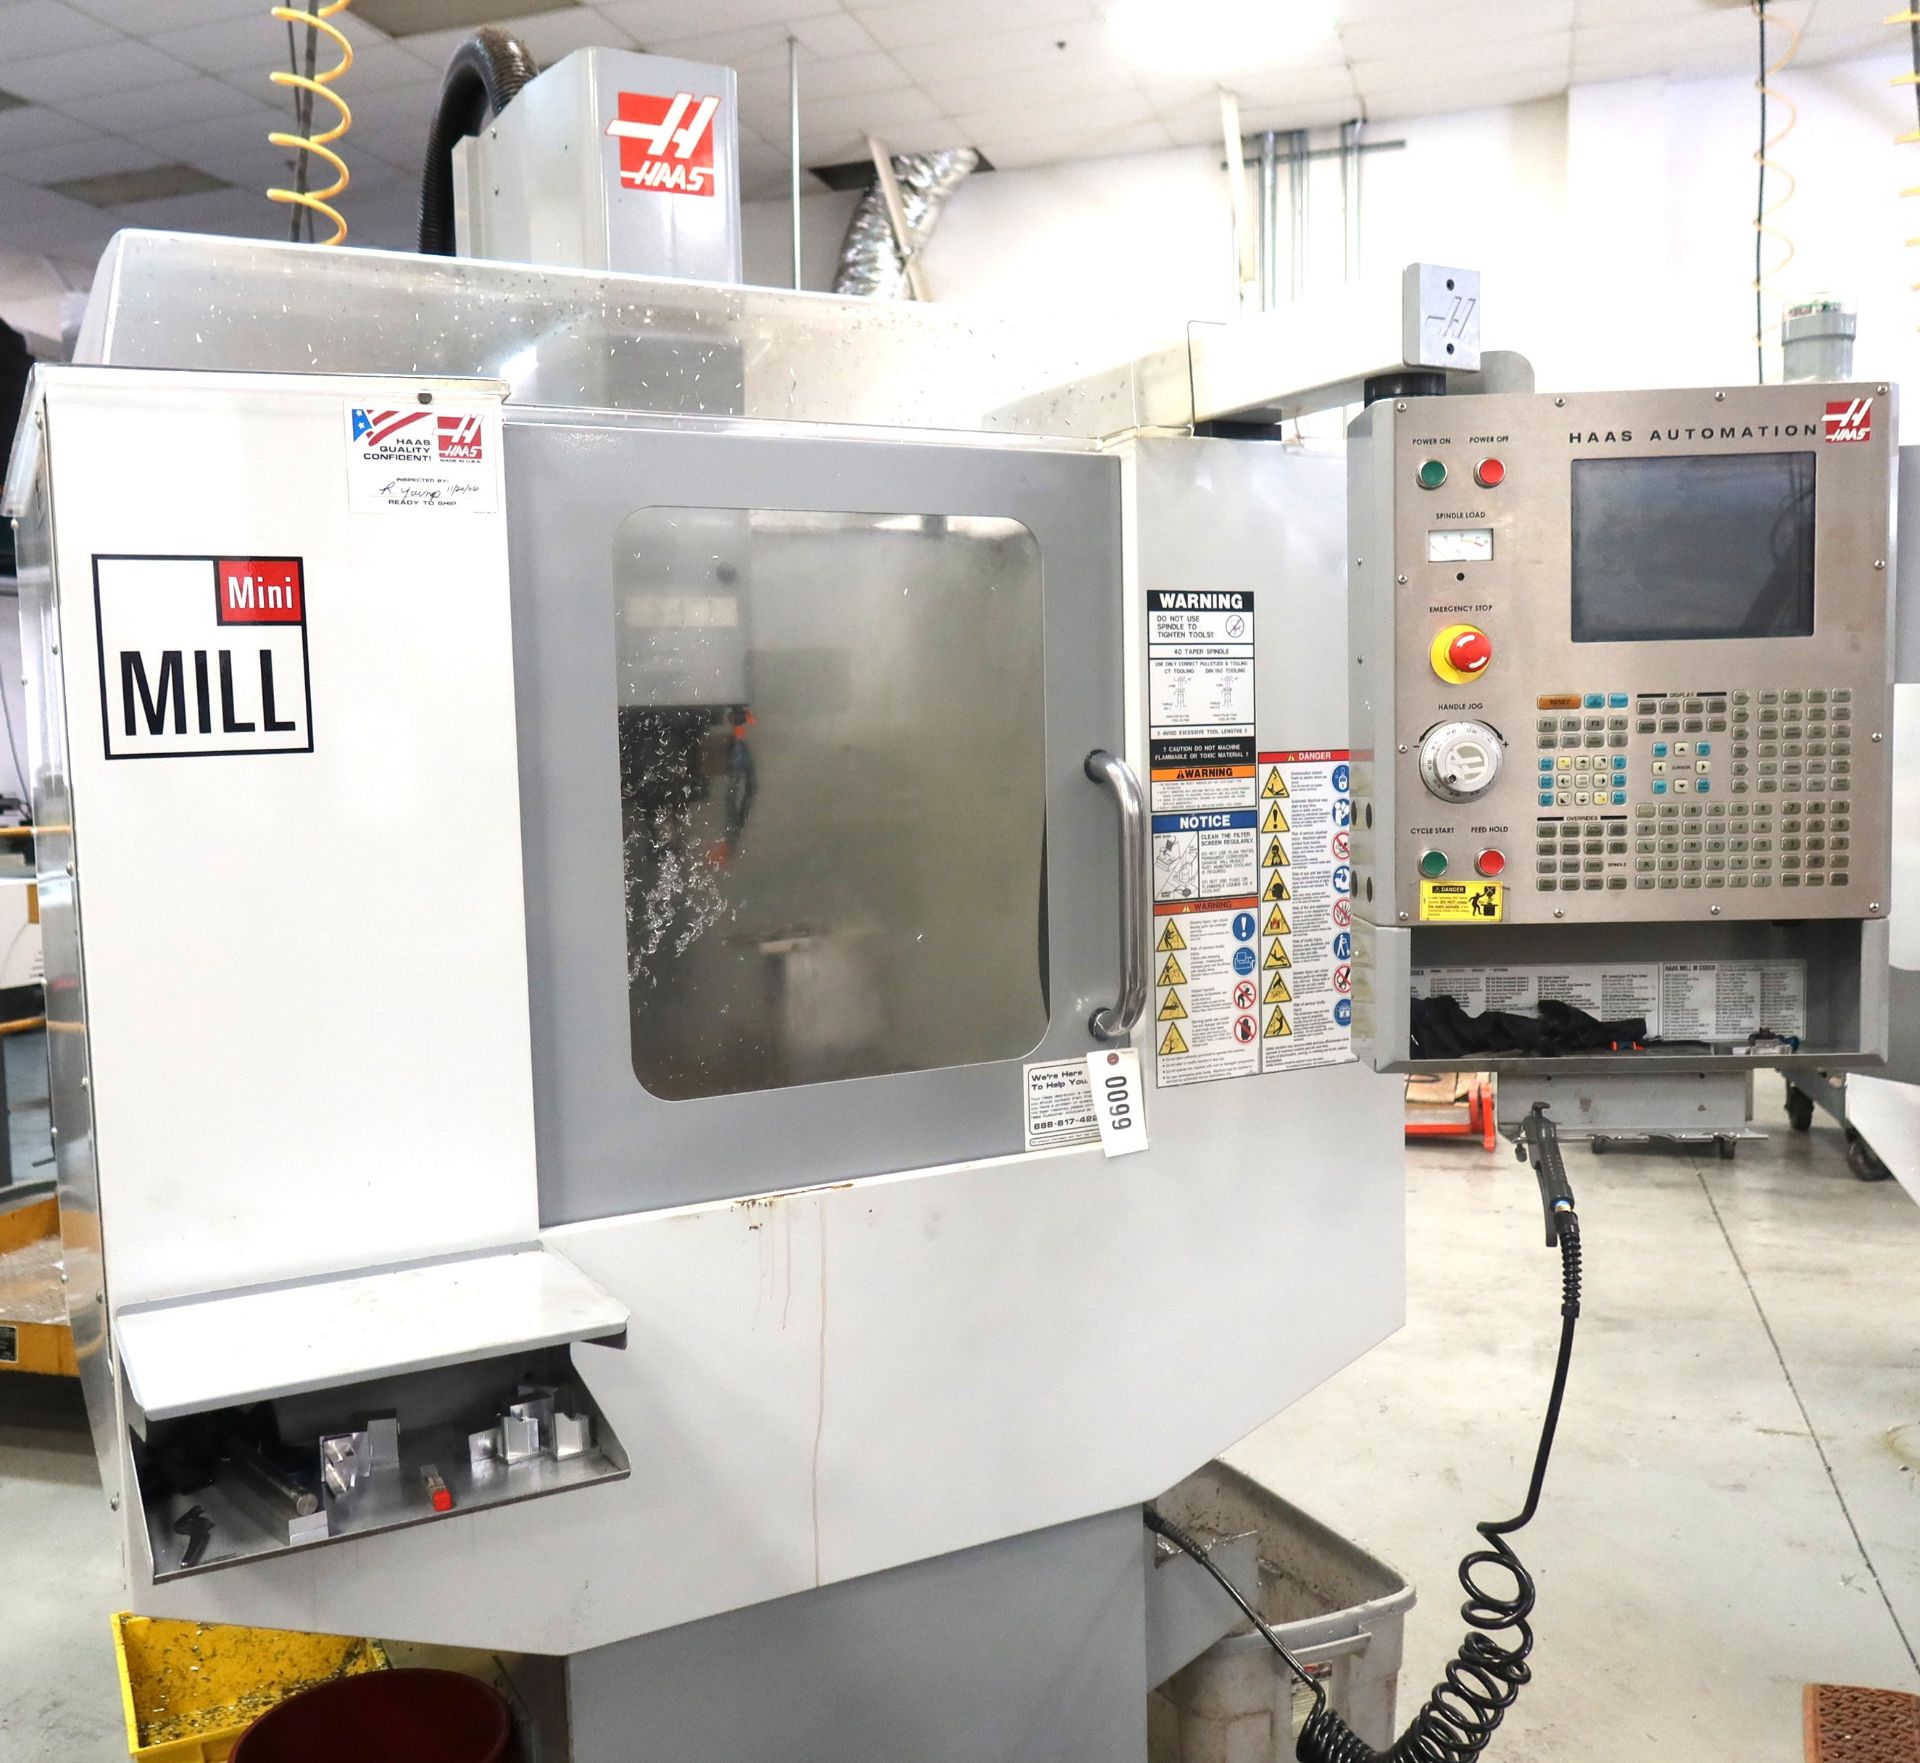 2006 Haas Mini Mill CNC 4-Axis Vertical Machining Center, SN 1053875 - Image 5 of 8